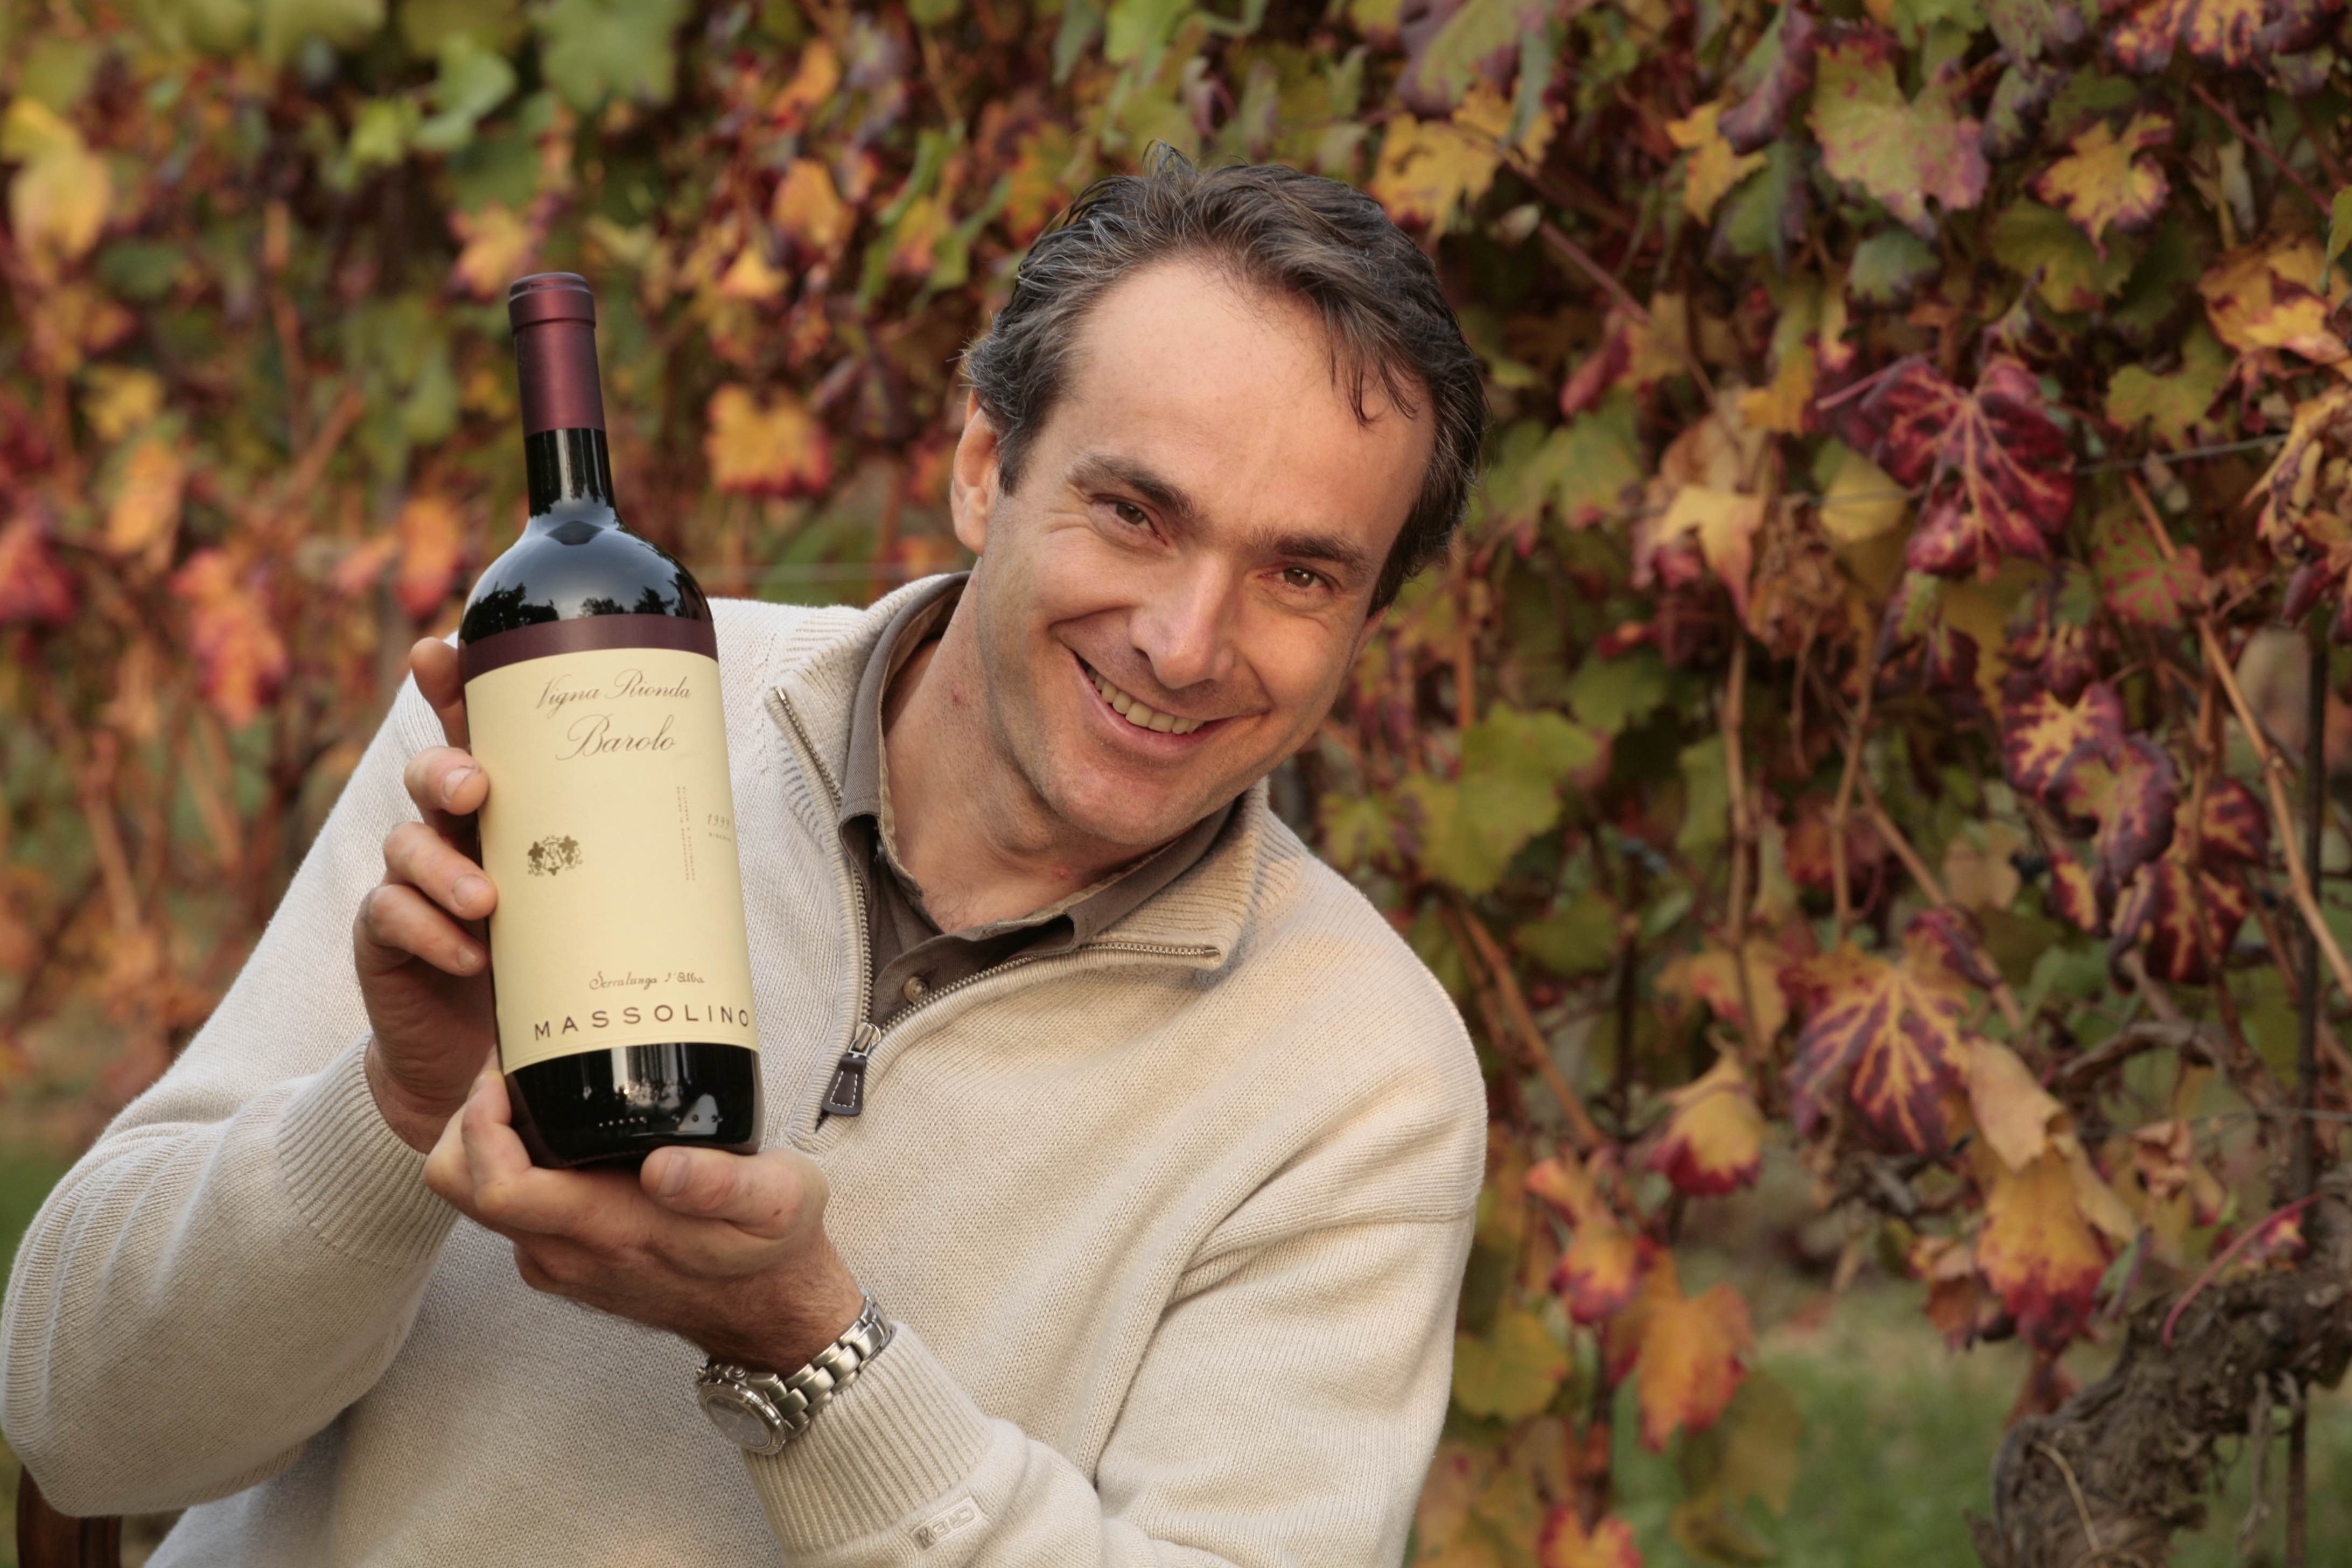 Franco Massolino: why Nebbiolo is part of our family’s history